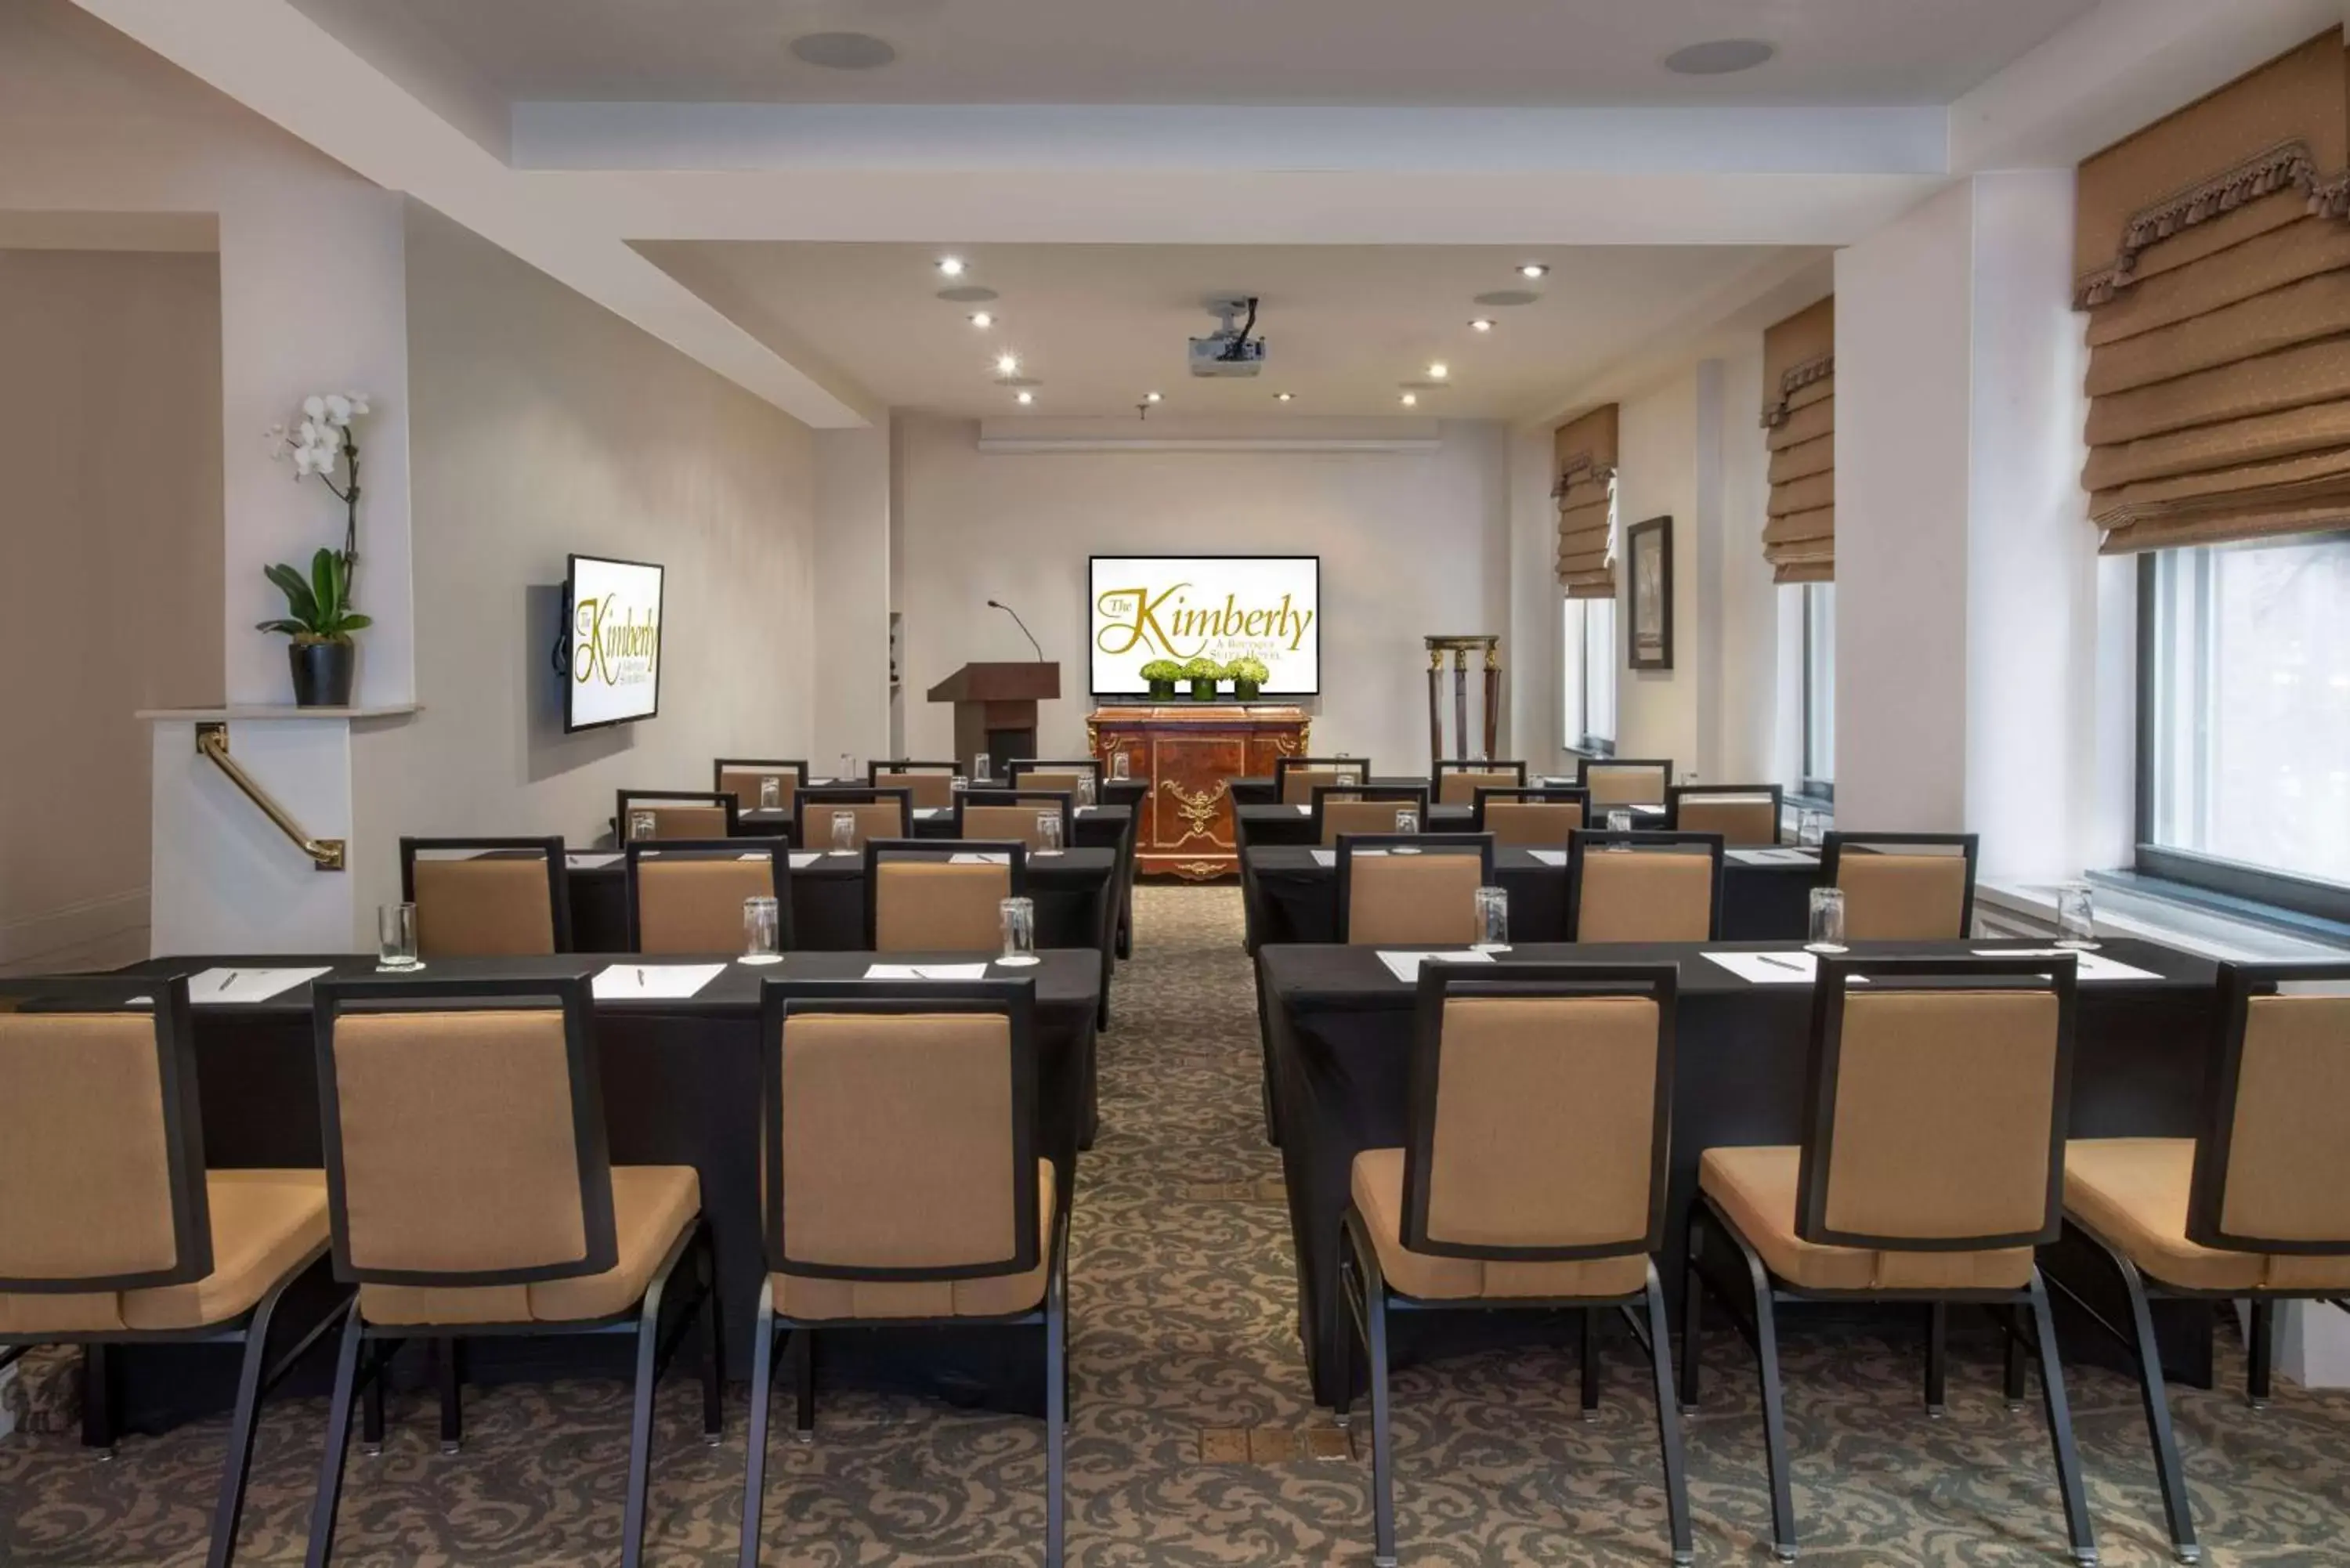 Business facilities in The Kimberly Hotel